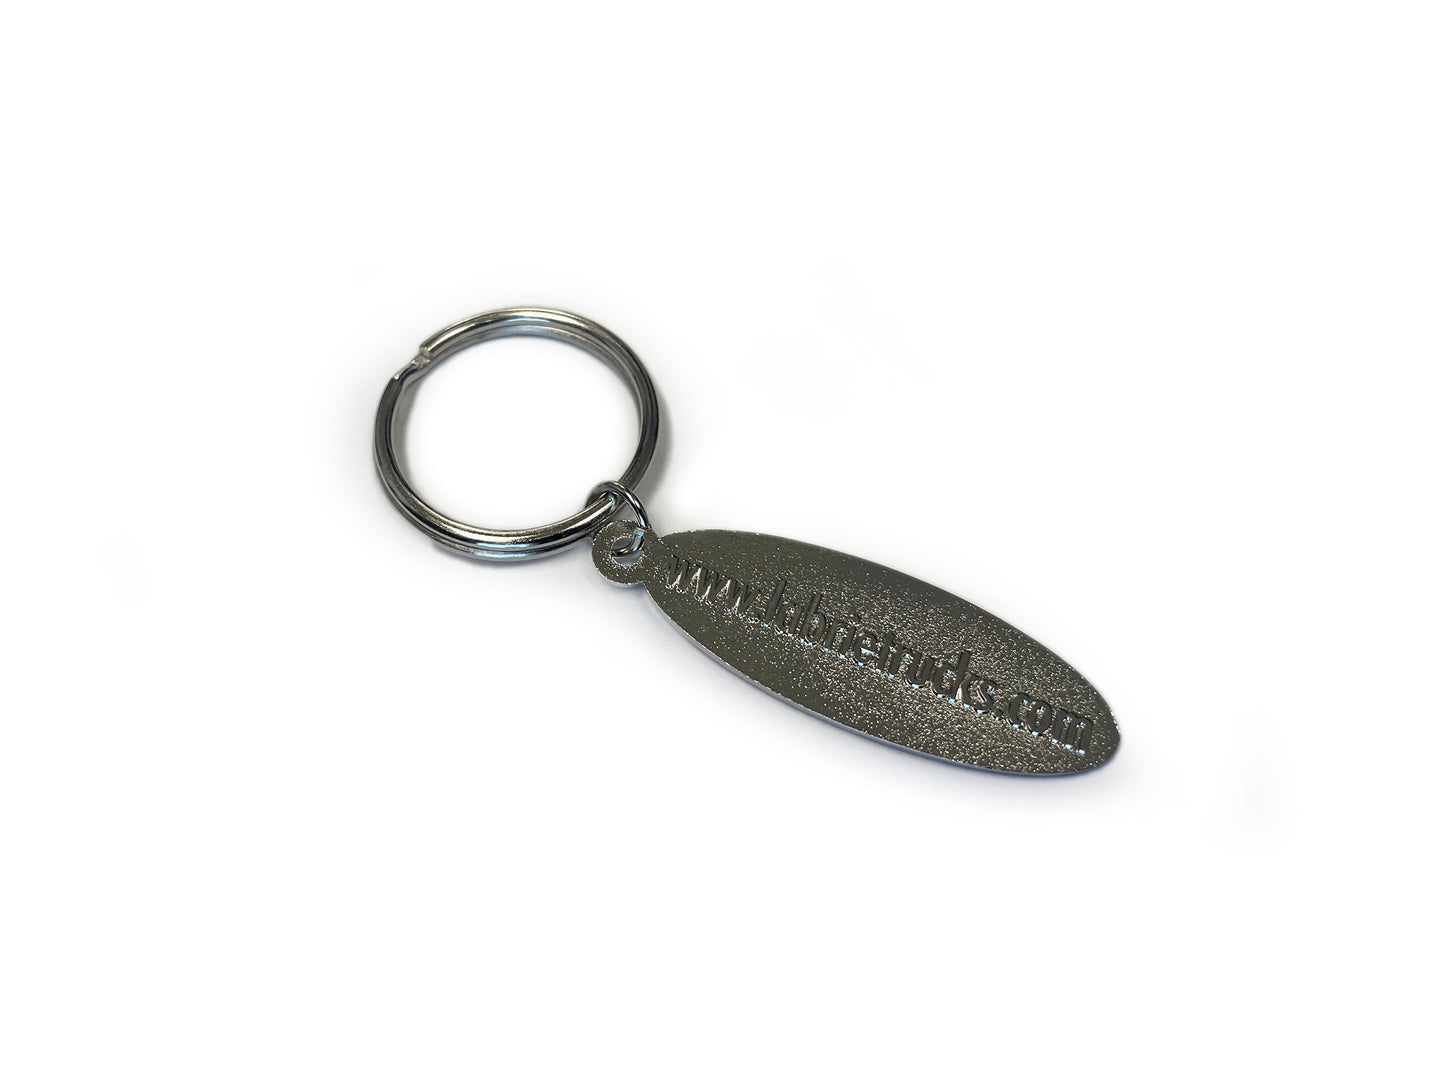 Labrie Truck Brand Key Chains